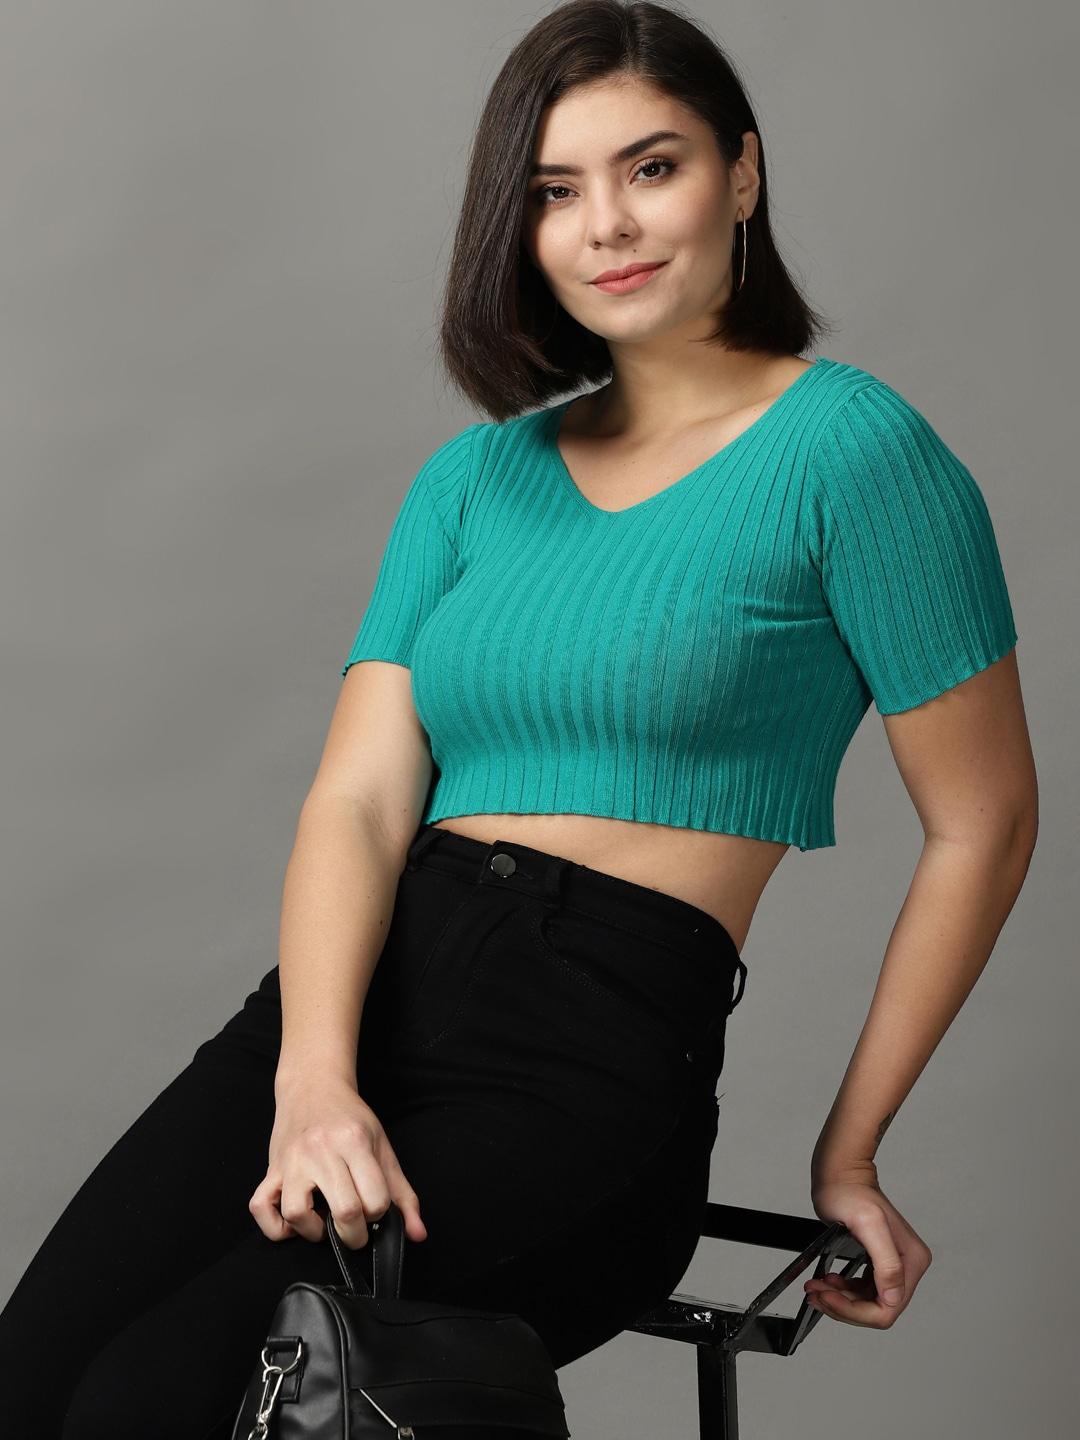 showoff-teal-green-v-neck-fitted-acrylic-crop-top